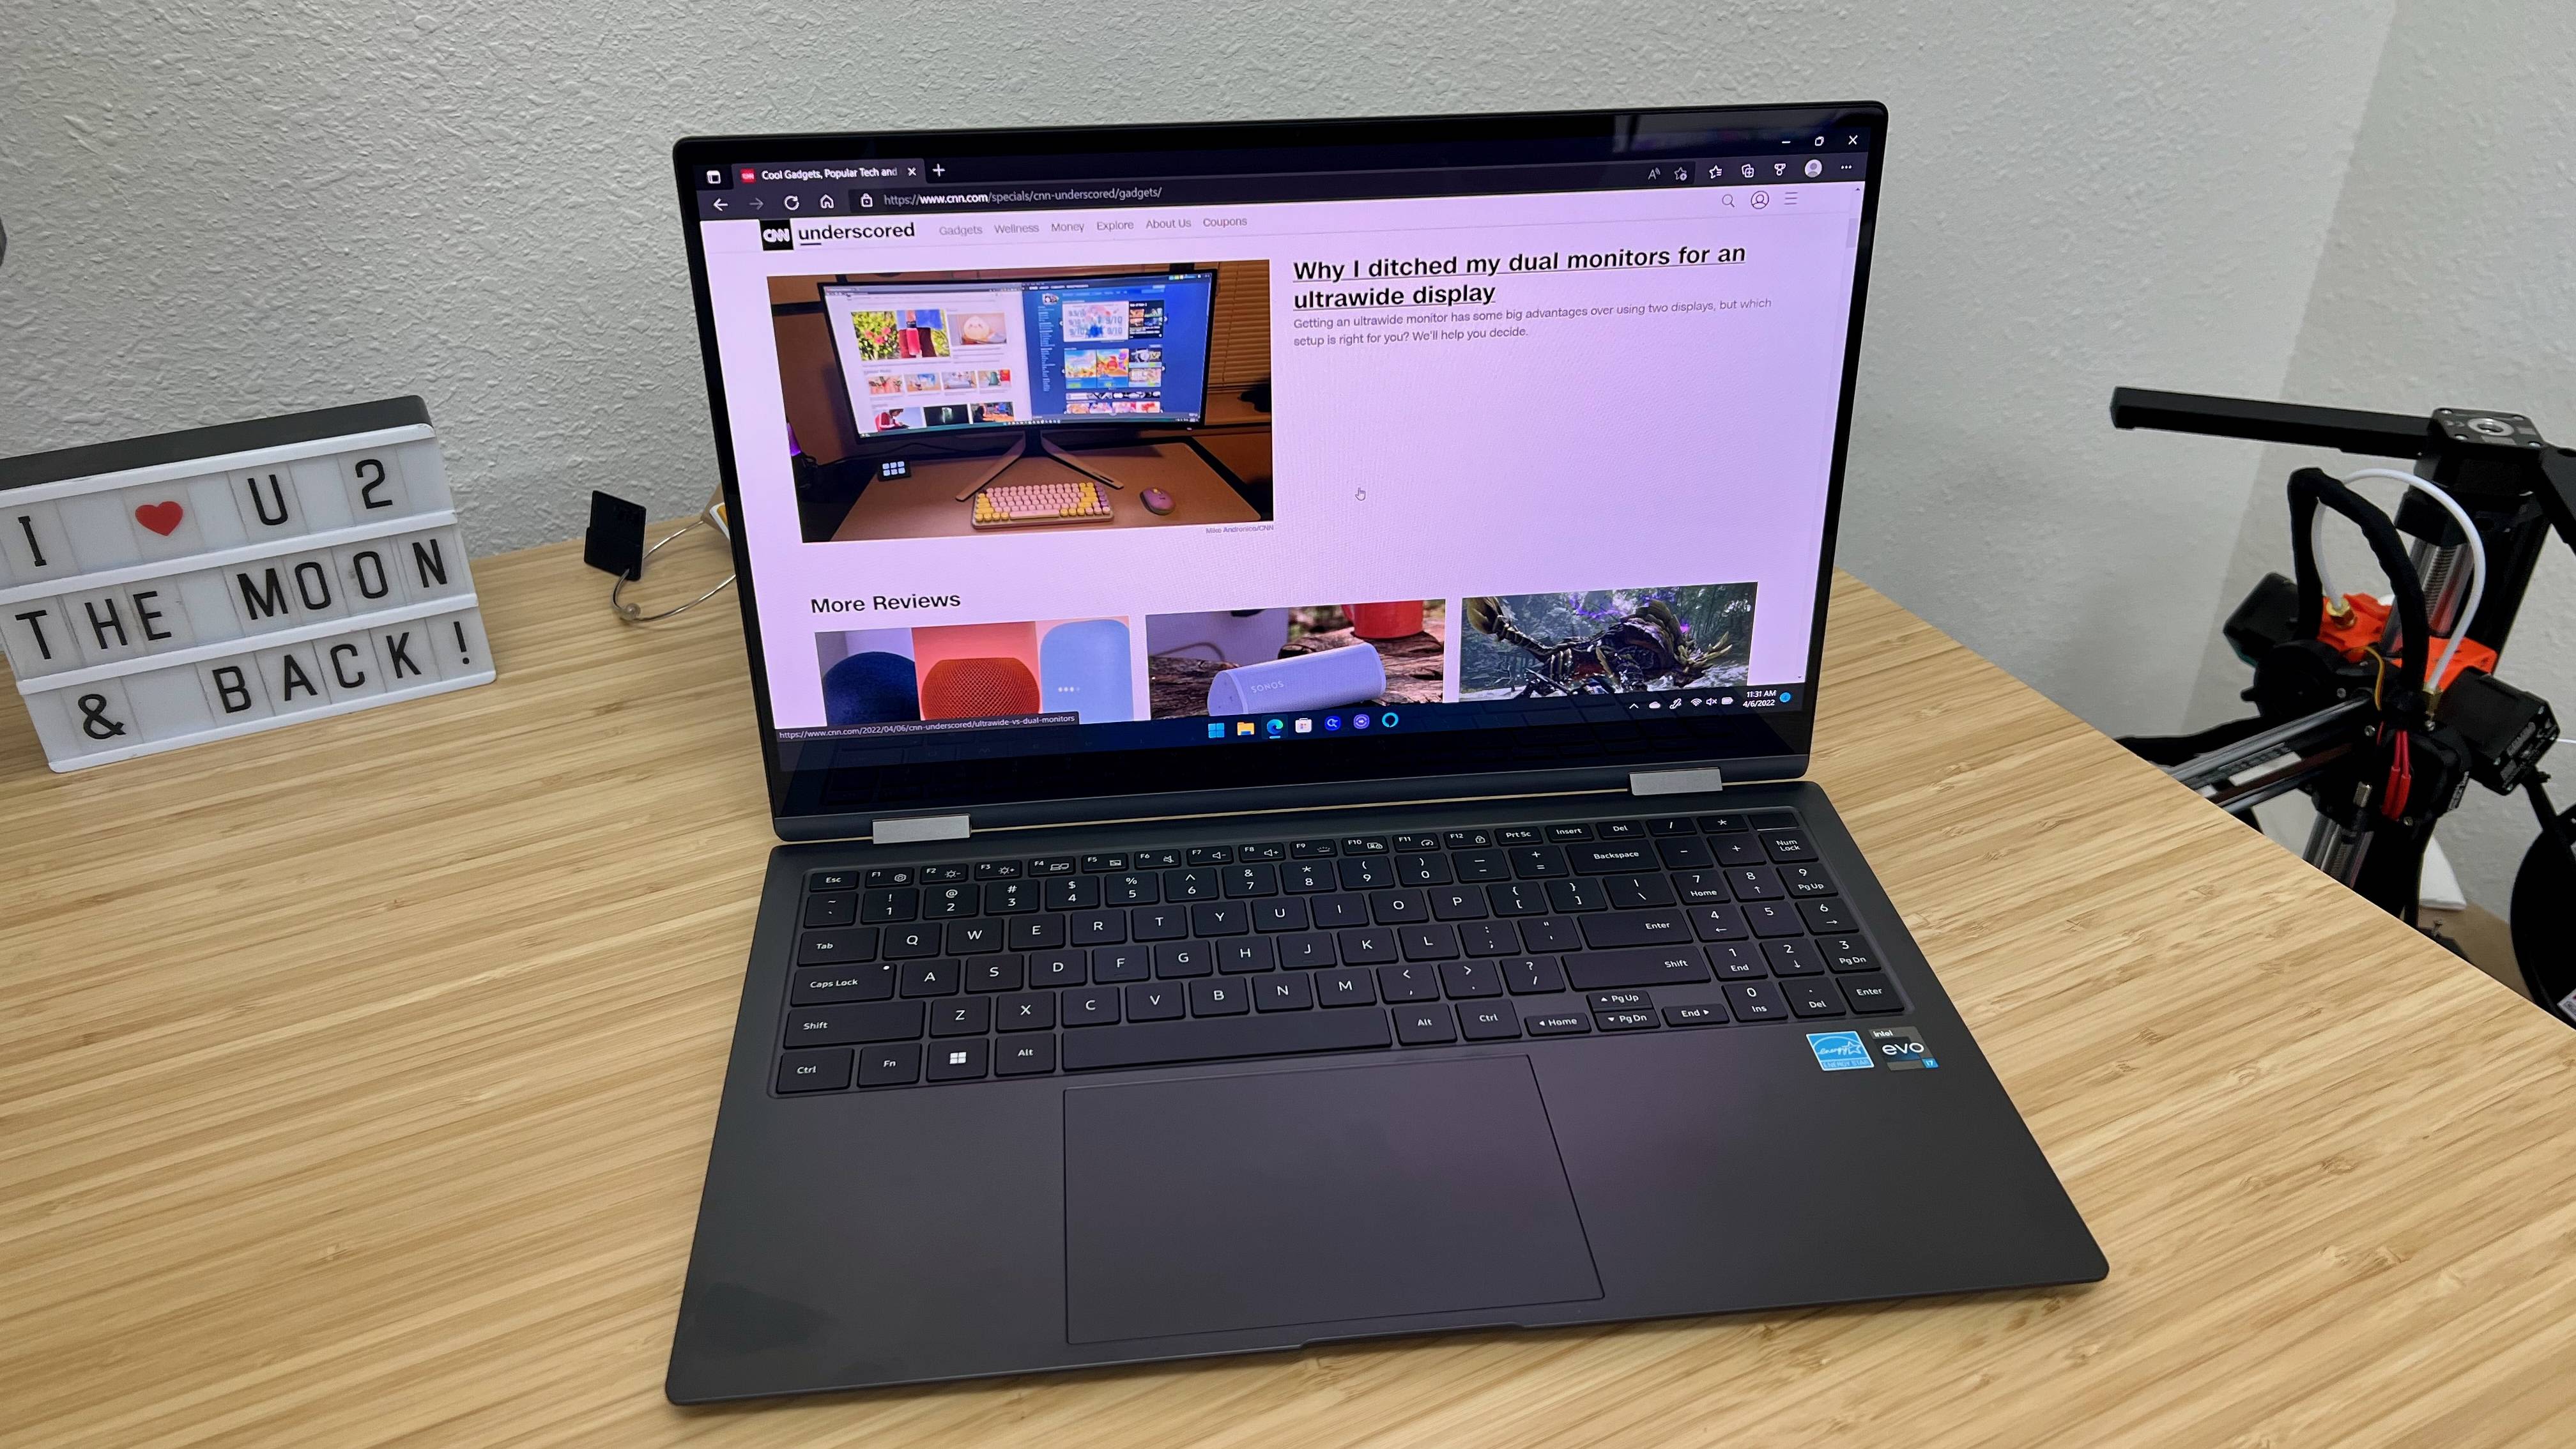 Samsung Galaxy Book 2 Pro 360 review: A slim and powerful 2-in-1 laptop | CNN Underscored